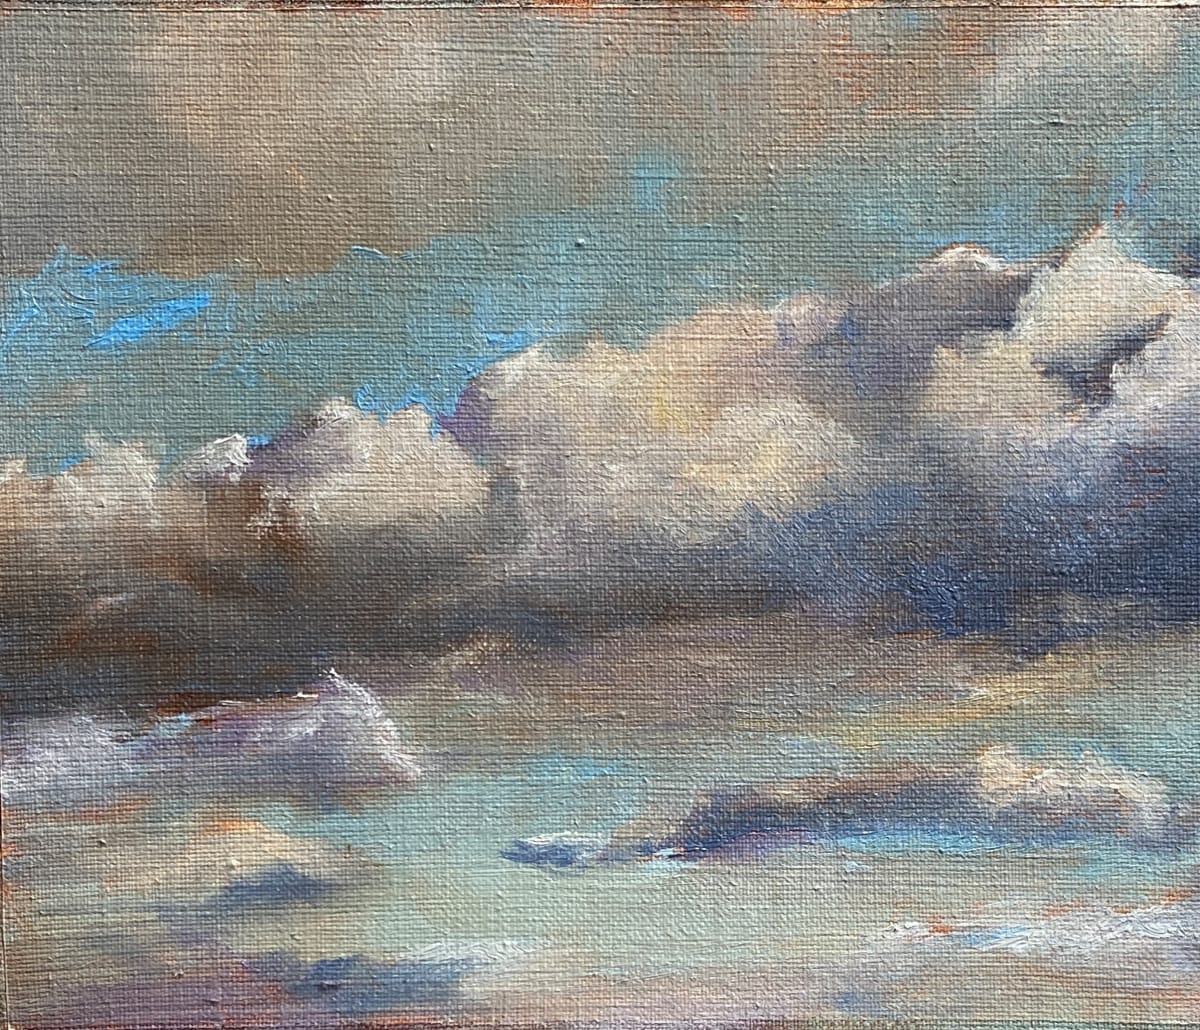 The Weight of Clouds by Rosemary Pergolizzi  Image: 4 x 6” oil on Linen